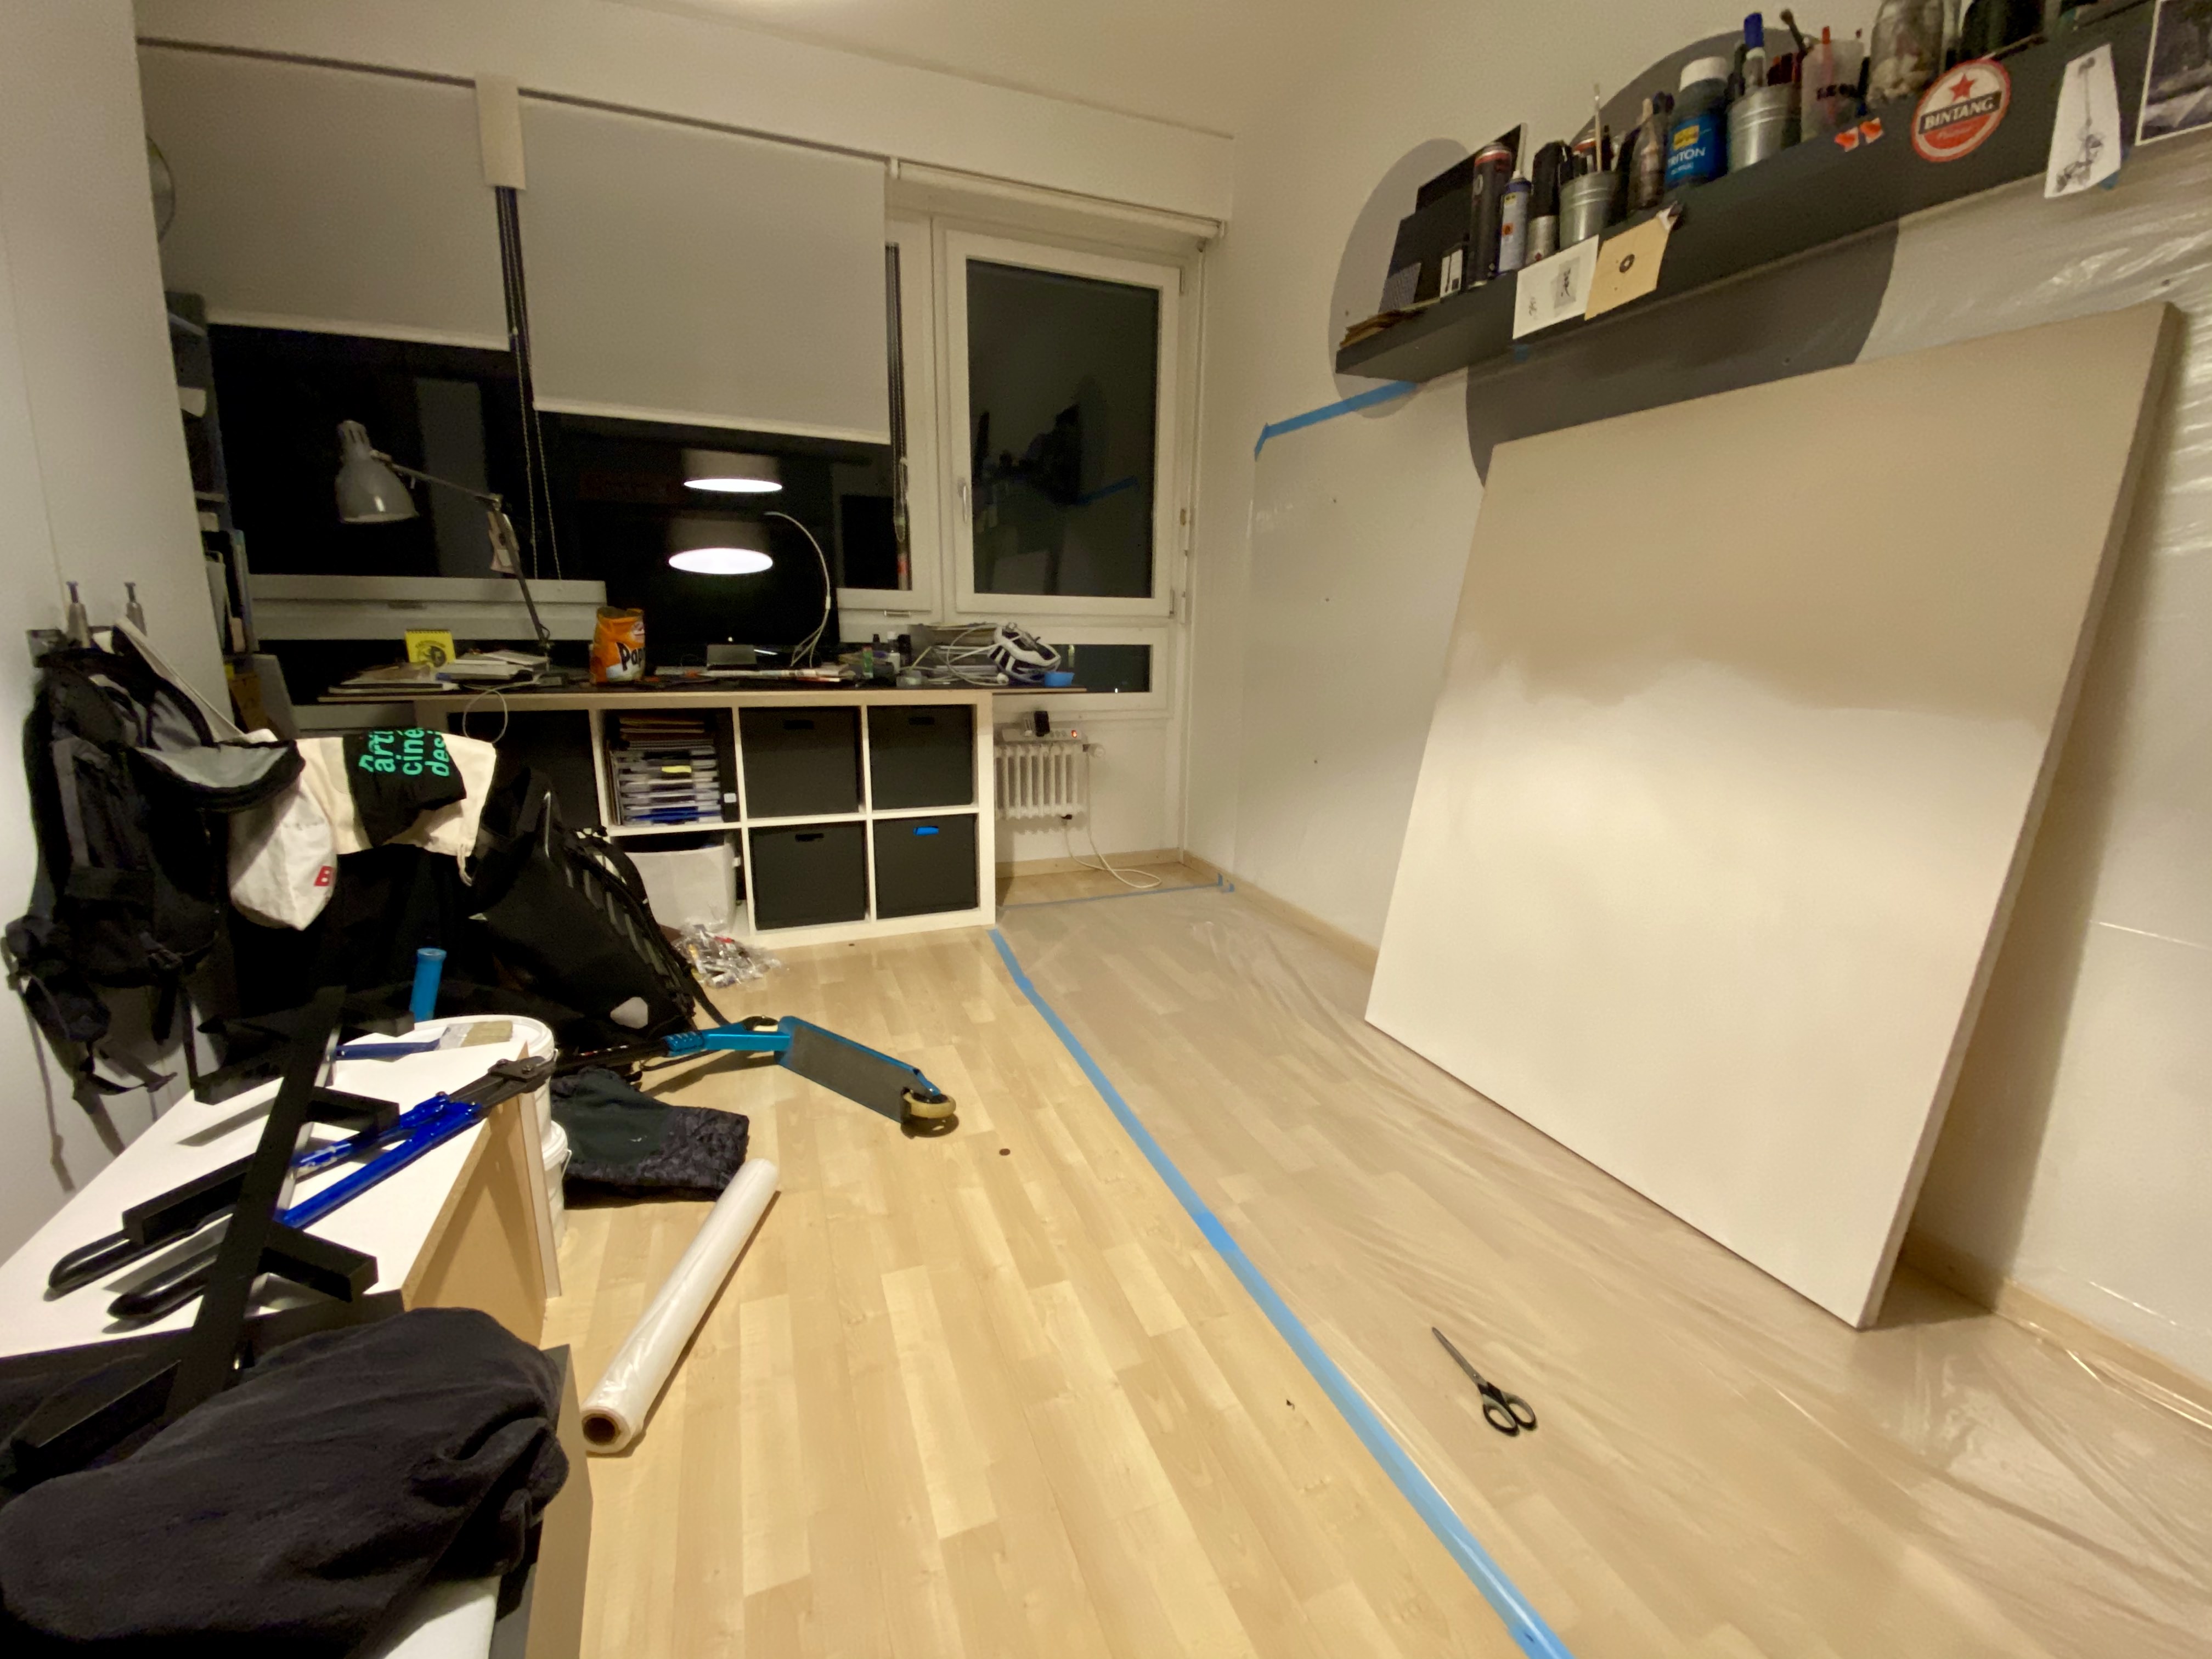 Mathias turned his bedroom into a workshop